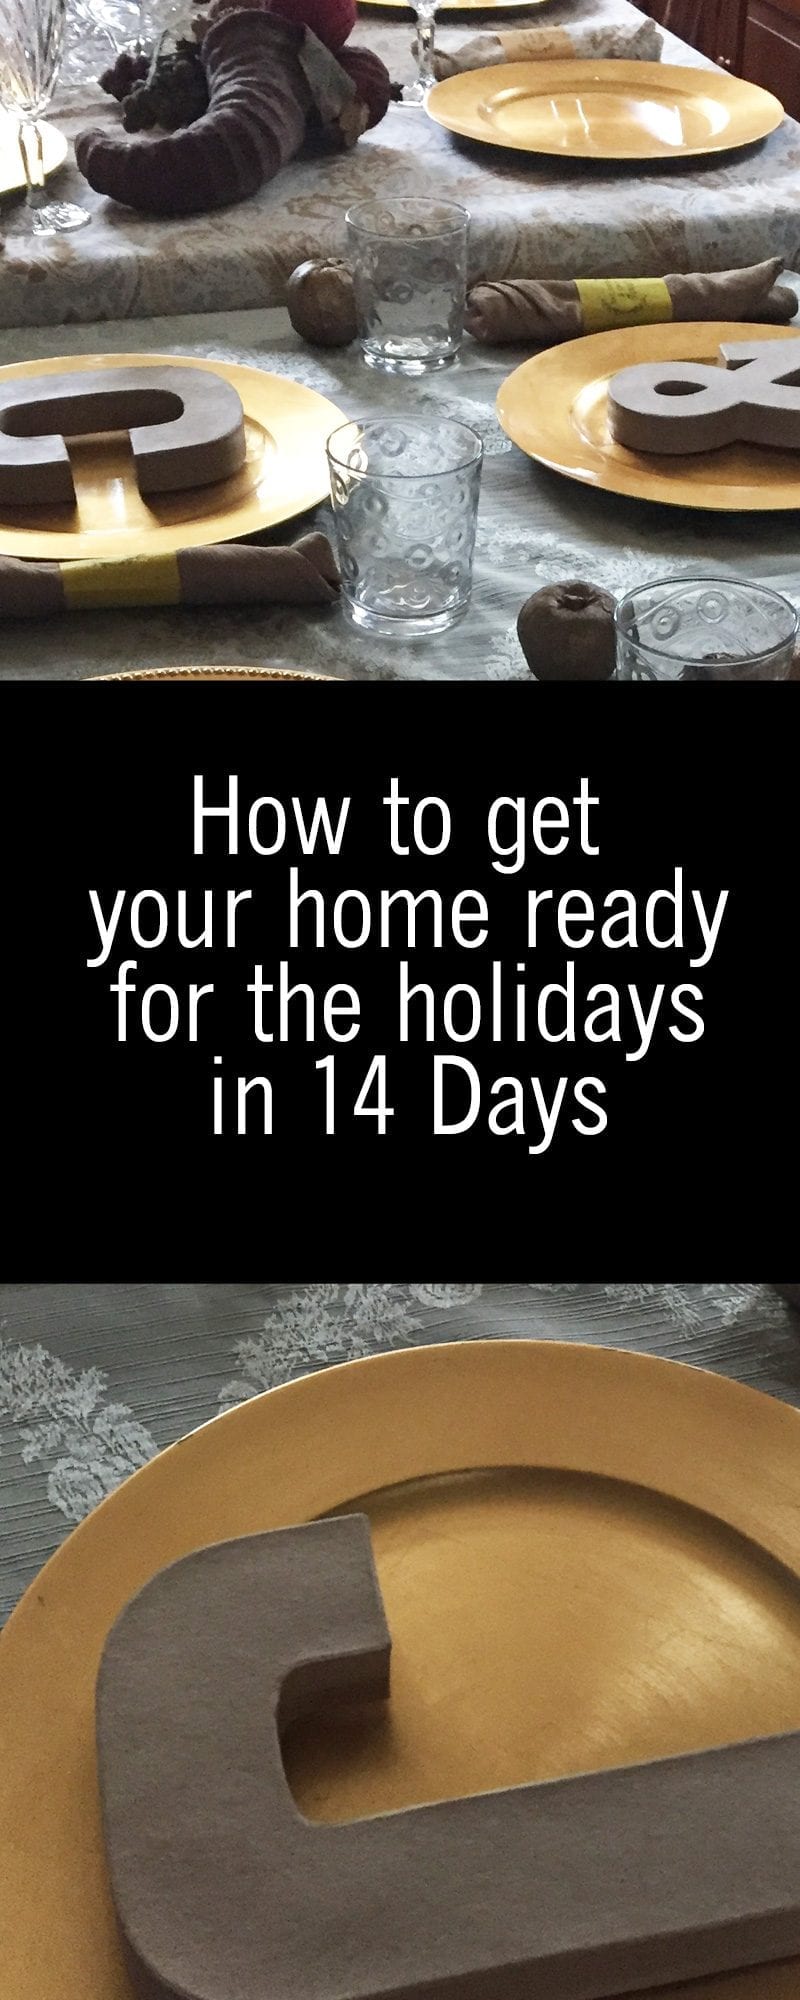 How to get your home ready for the holidays in 14 Days